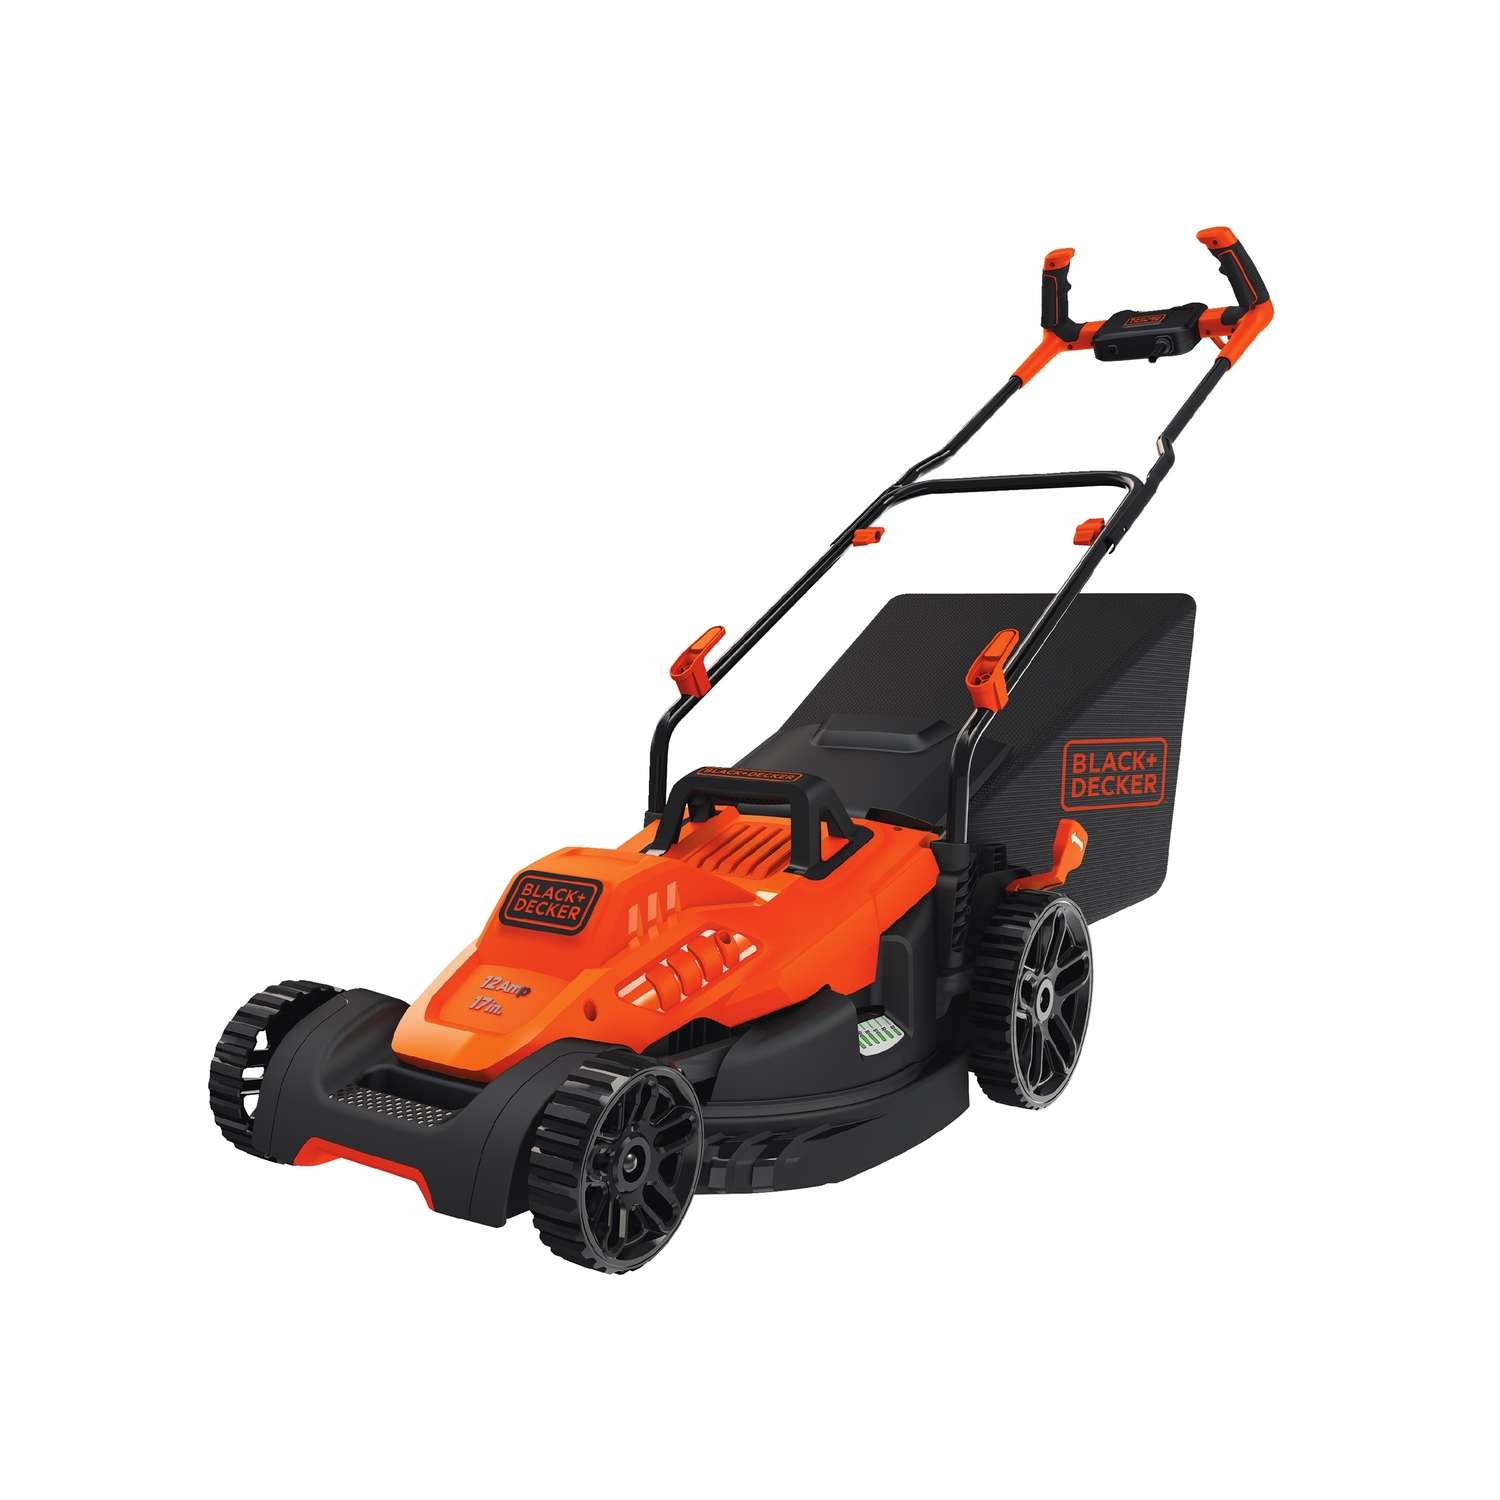 Black and Decker 17 in. 120 volt Electric ManualPush Lawn